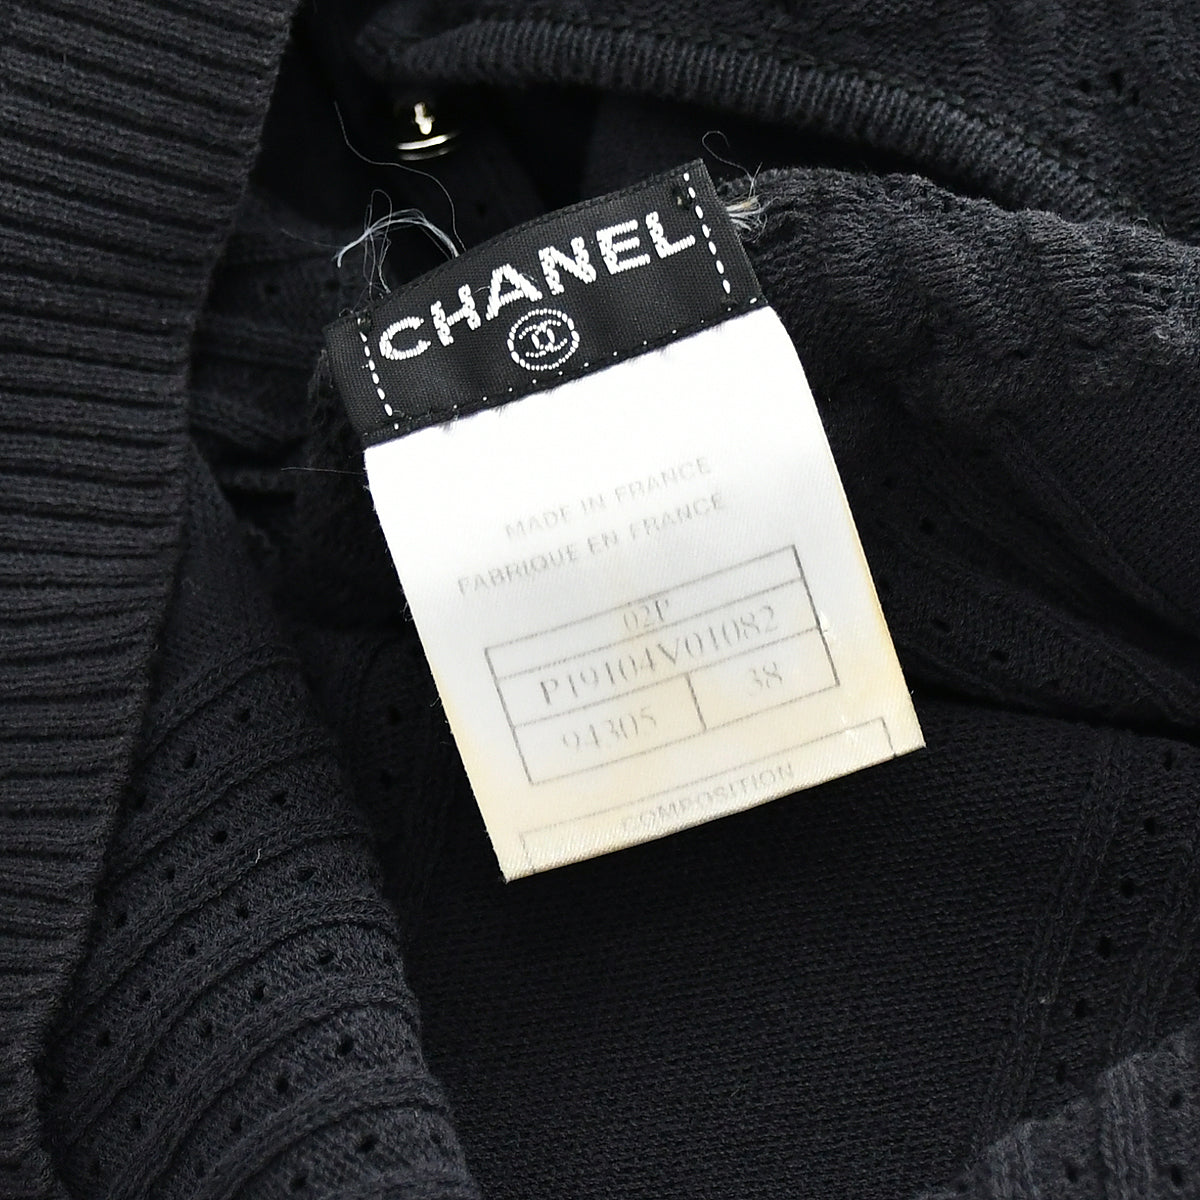 Chanel Short Sleeve Sweater Knit Tops Black 02P 